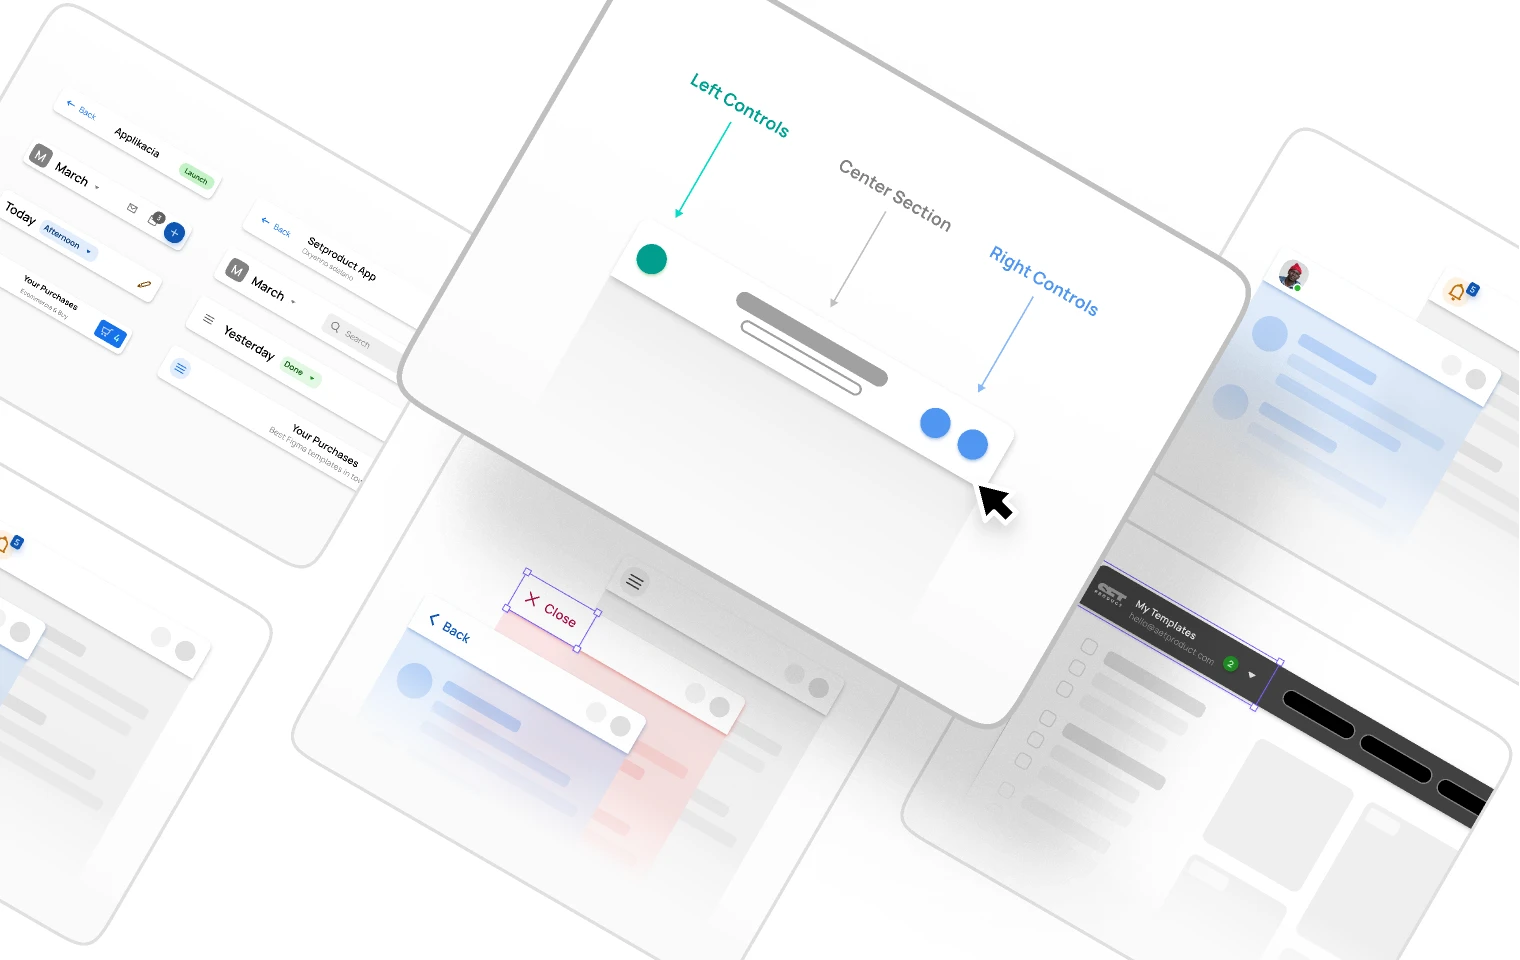 App Bar UI design guidelines for Figma and Adobe XD